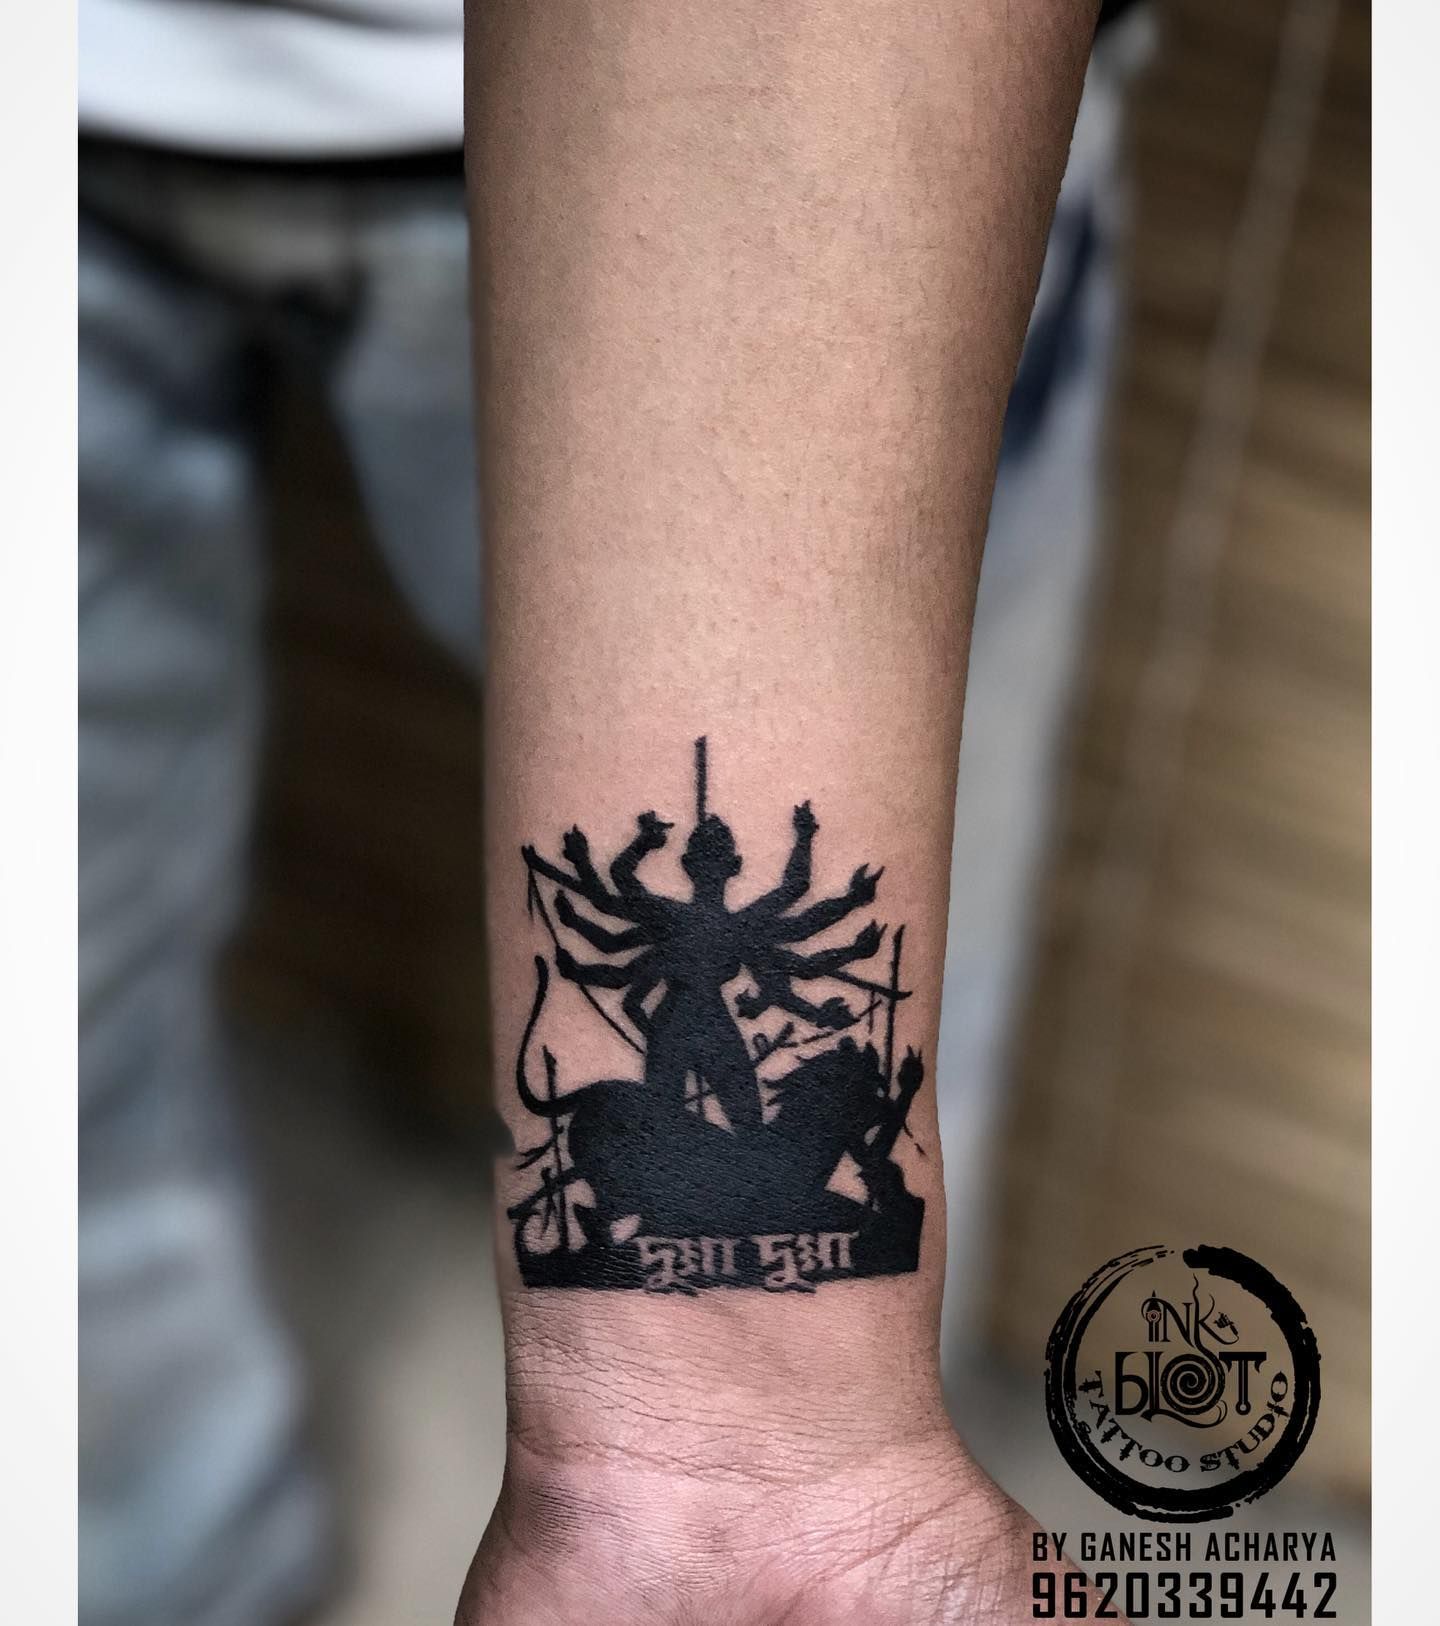 Swapnil'S TATTOO STUDIO - Check out this Maa durga piece ,with a trishul in  it. Artist - Swapnil Vijaywargiya STUDIO- @swapnils_tattoo_studio #bhopal  #india For bookings - (8109246030) .. #tattooing #tattooart #